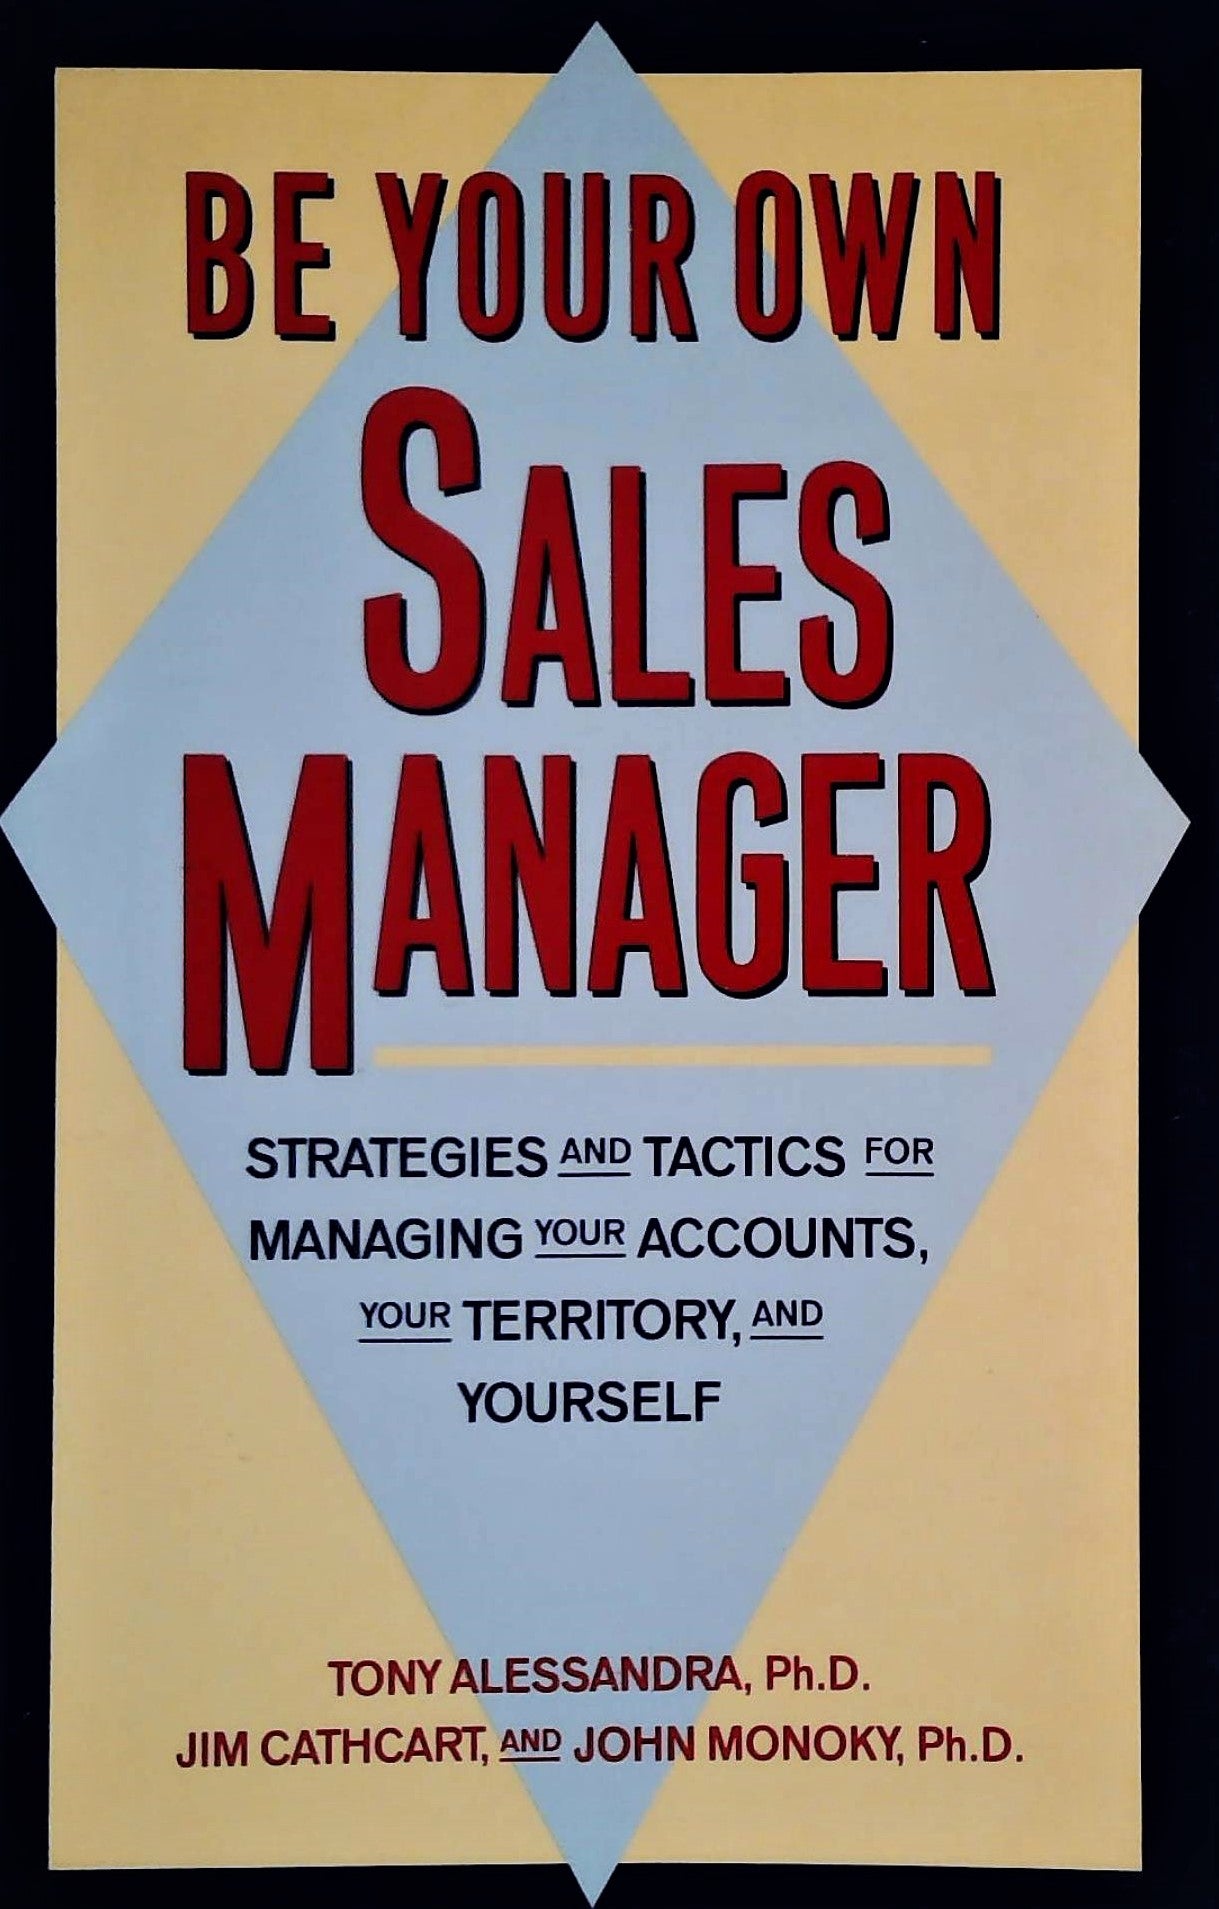 Livre ISBN 0671761757 Be Your Own Sales Manager: Strategies And Tactics For Managing Your Accounts, Your Territory, And Yourself (Tony Alessandra, Ph.D.)